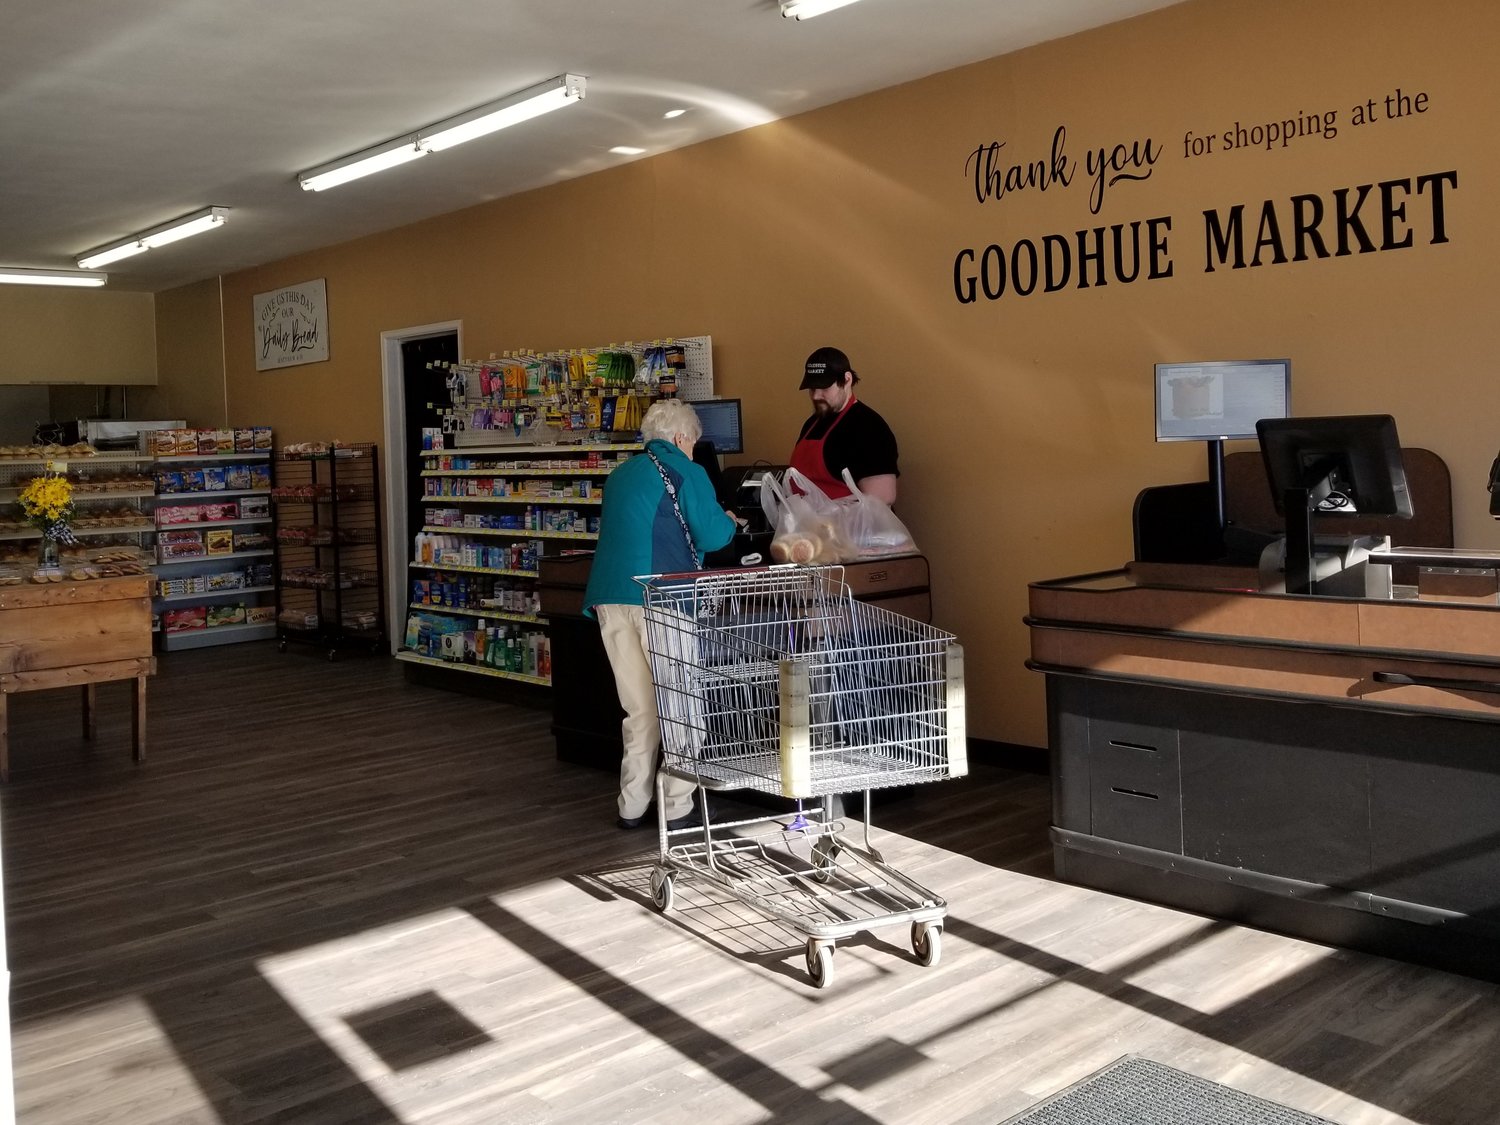 The newly refreshed Goodhue Market has a more open look and feel inside the doors and around the new checkout lanes.